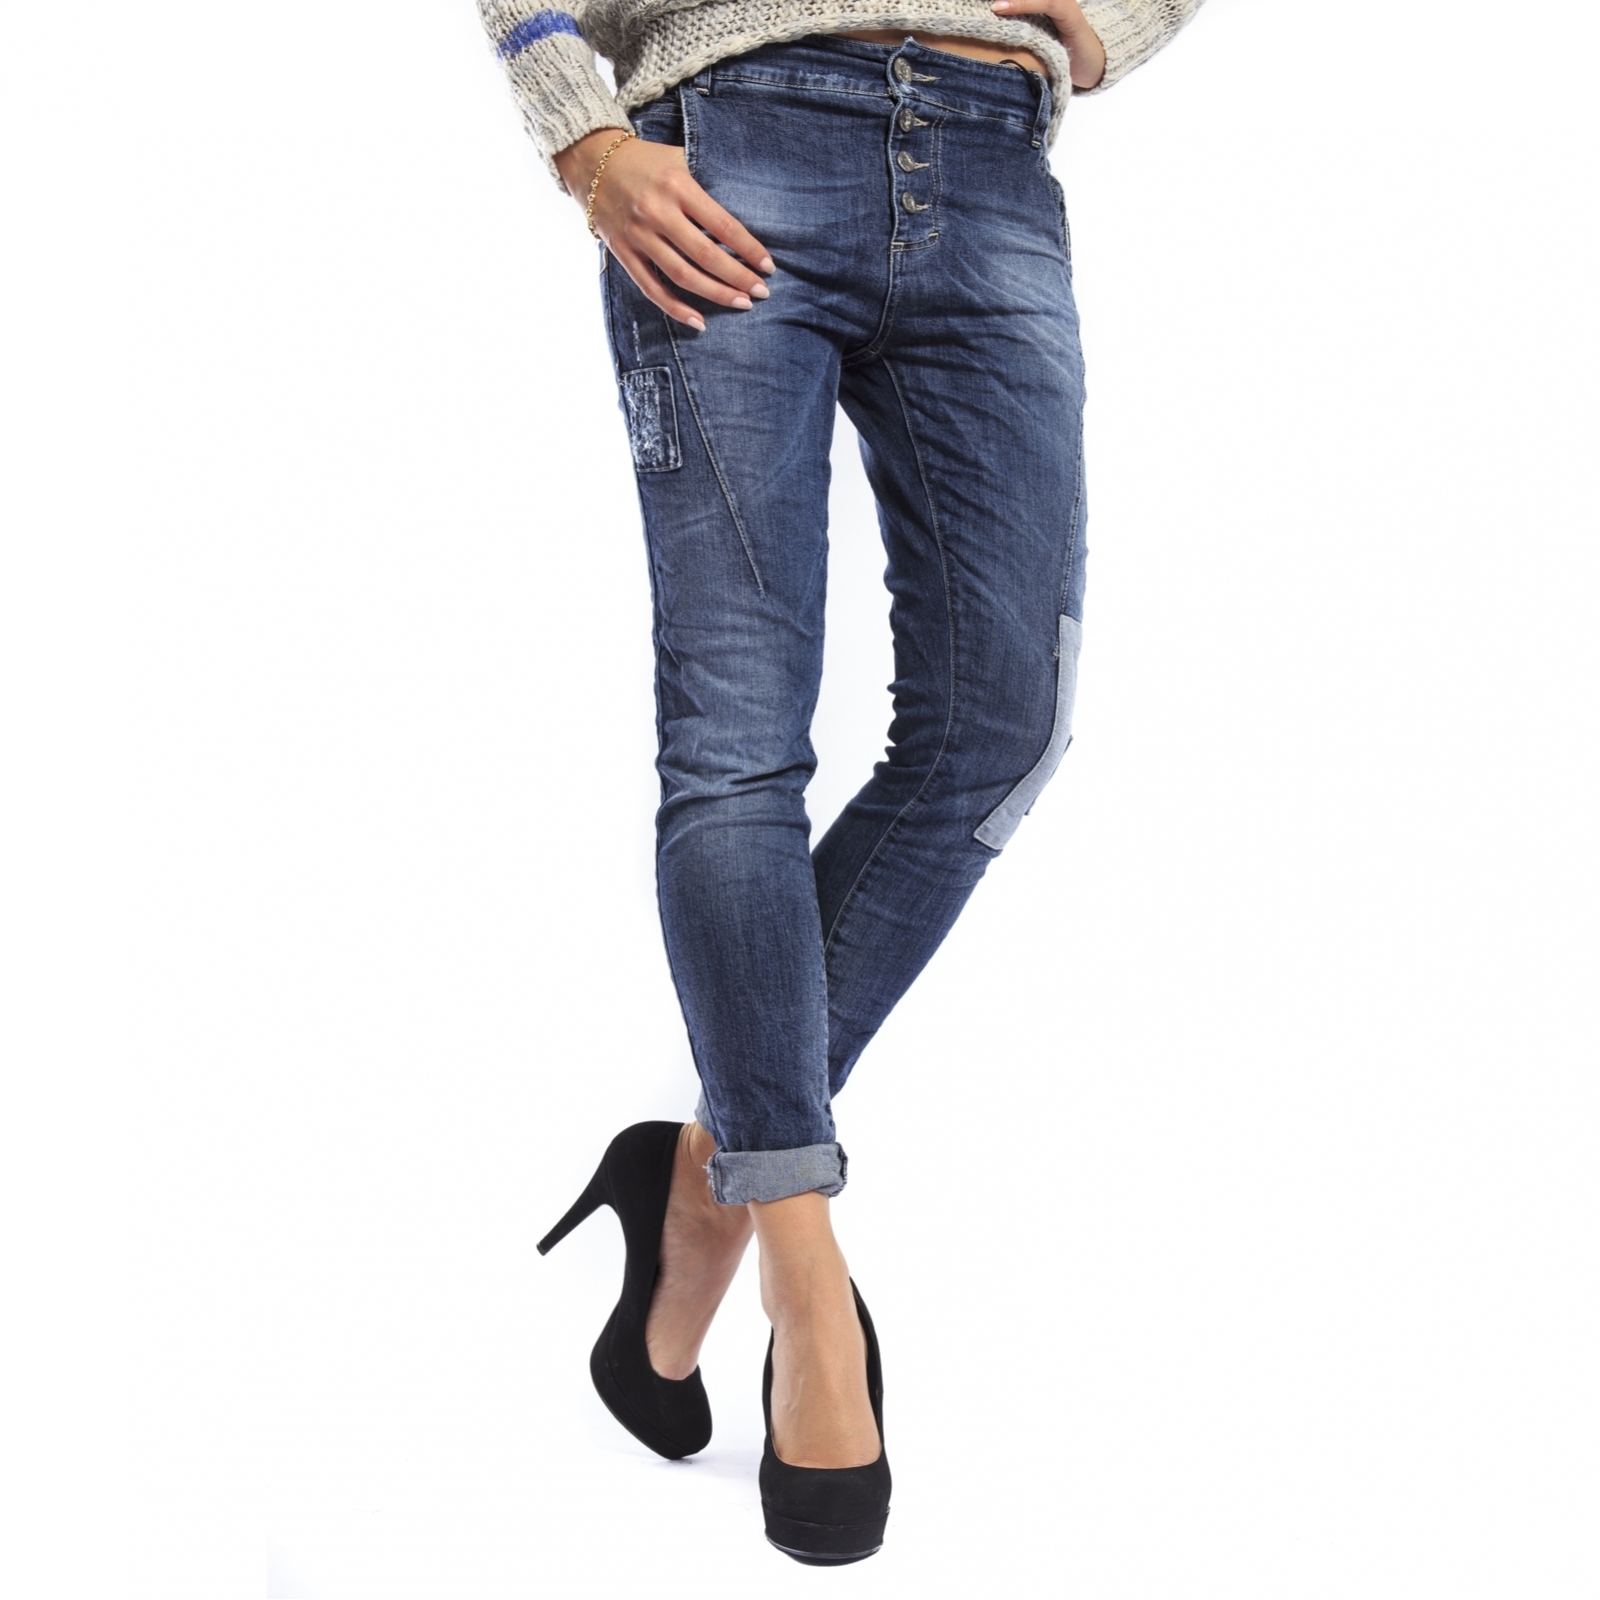 sæt ind Et kors Kvalifikation MARYLEY jeans boyfriend baggy 4 buttons DENIM B51D FALL/WINTER 14-15 MADE  IN ITALY - Ejeans